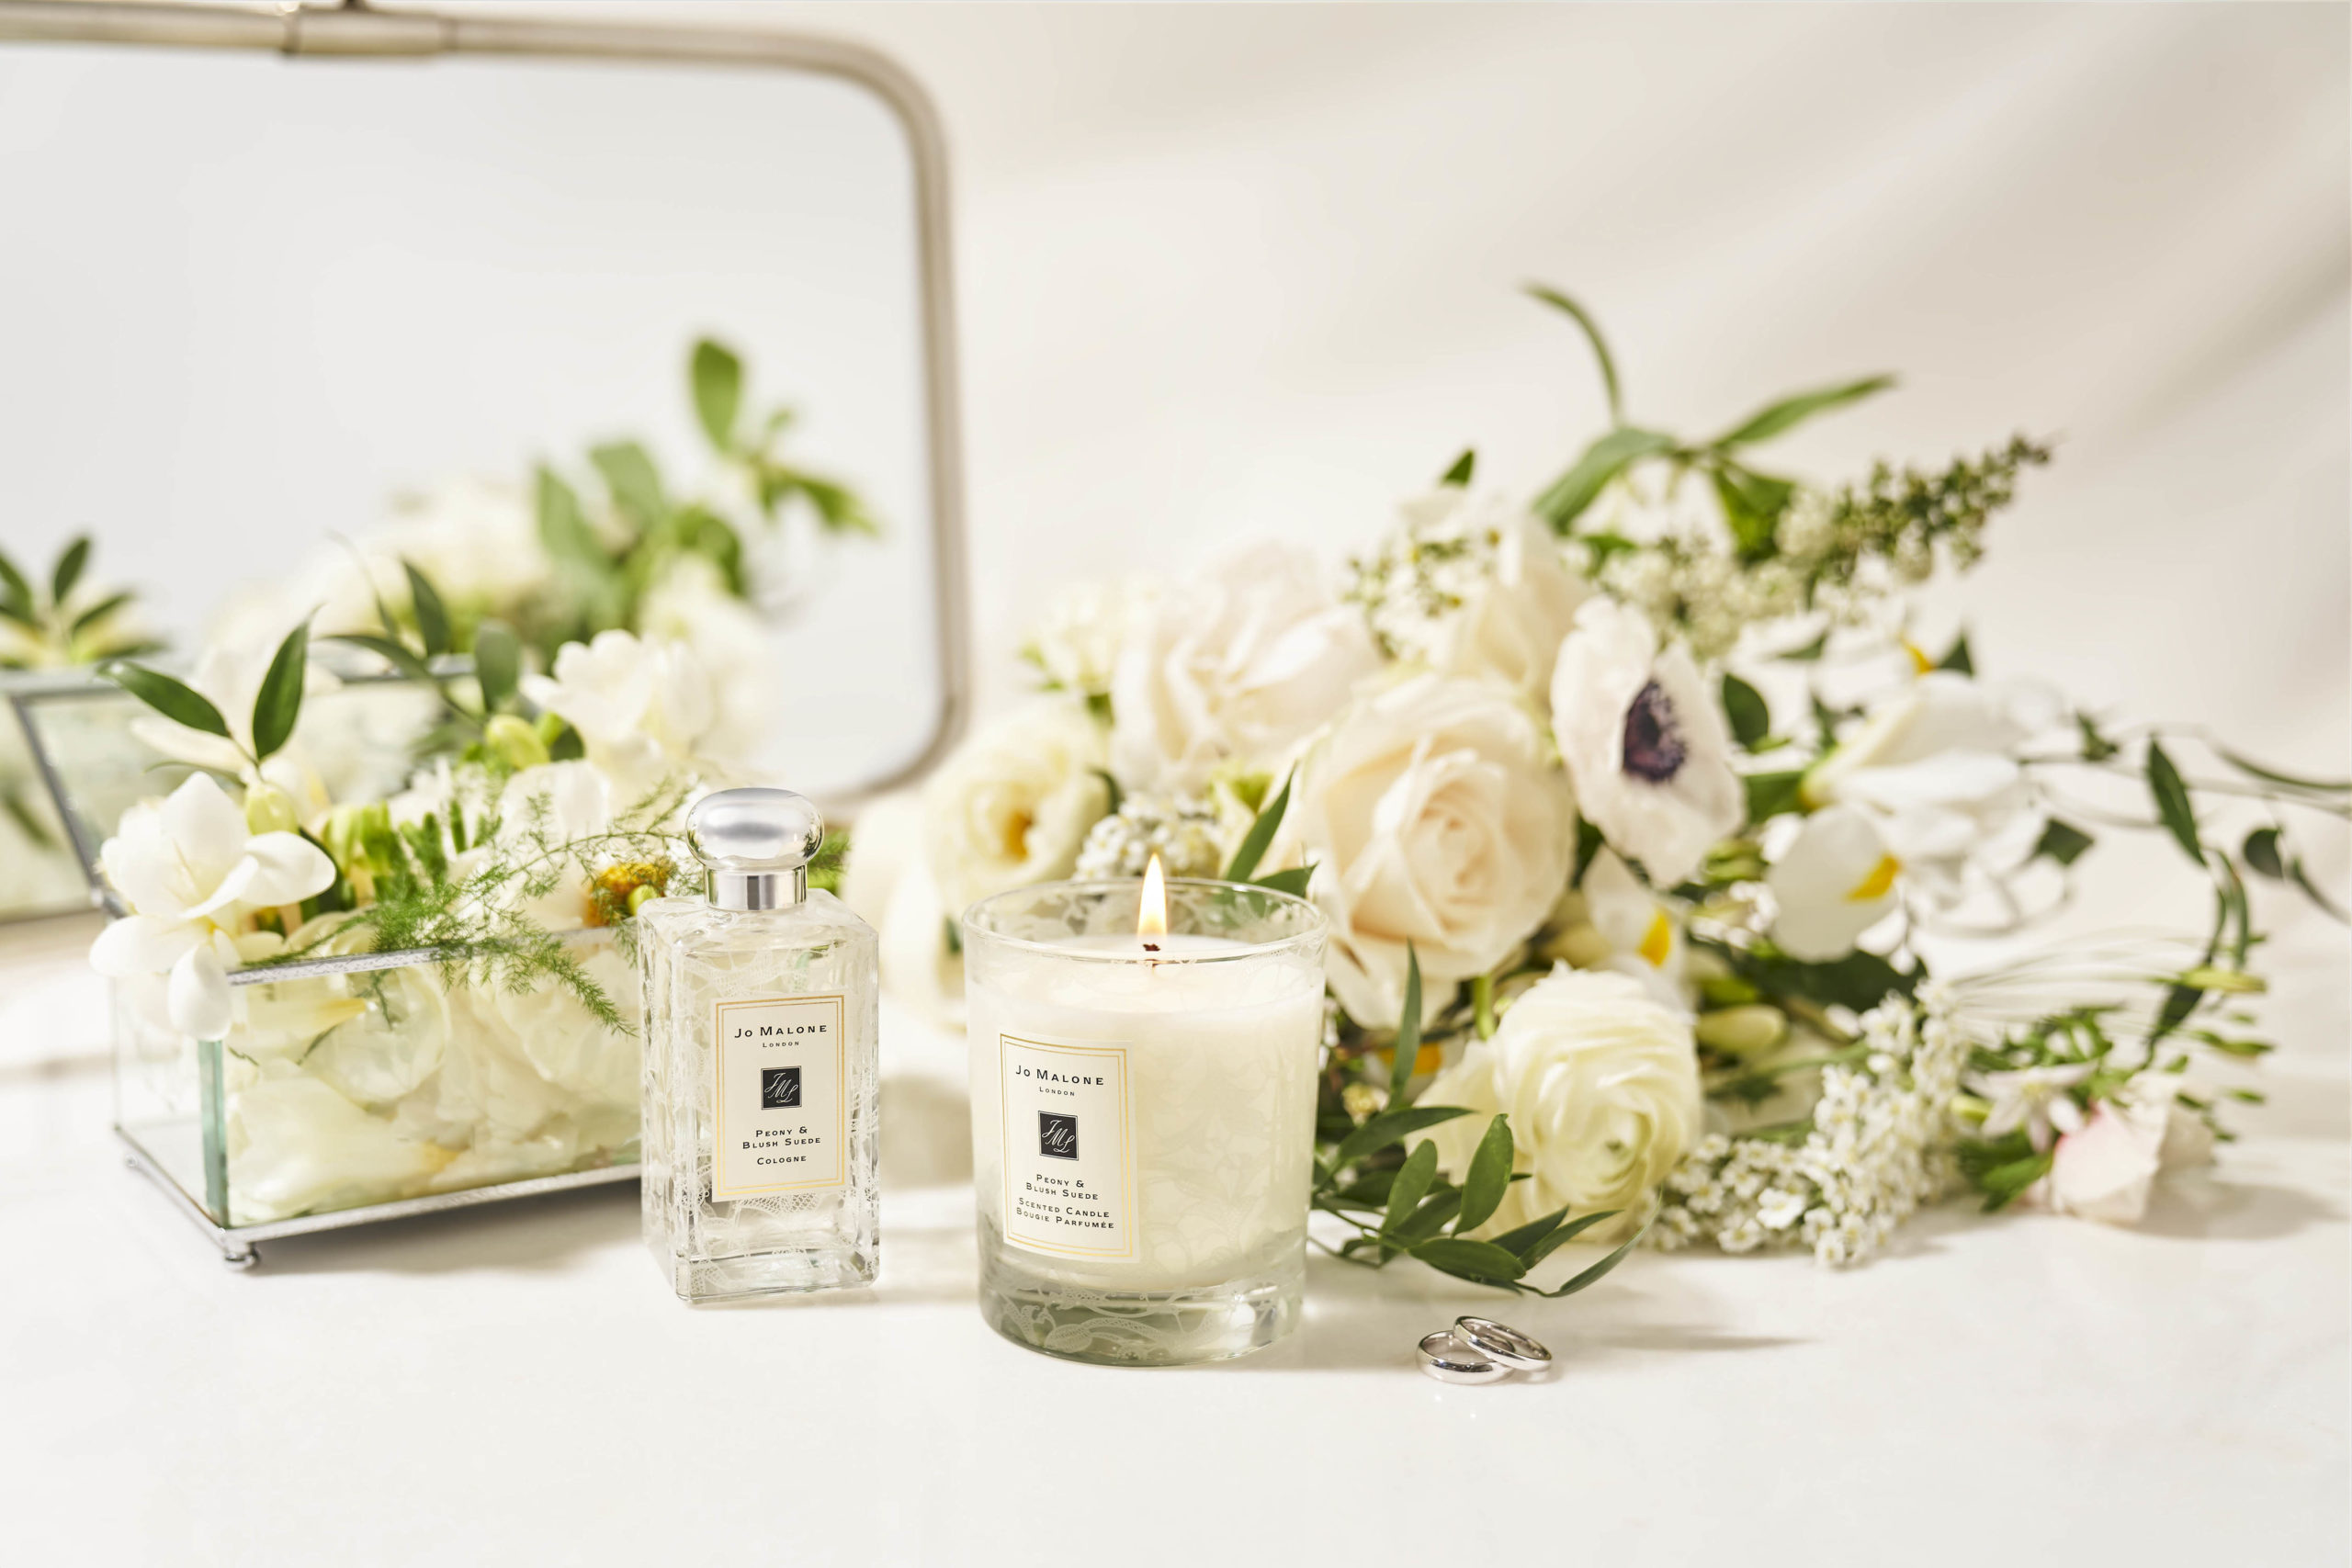 9 Questions with Jo Malone London - The Wedding Edition